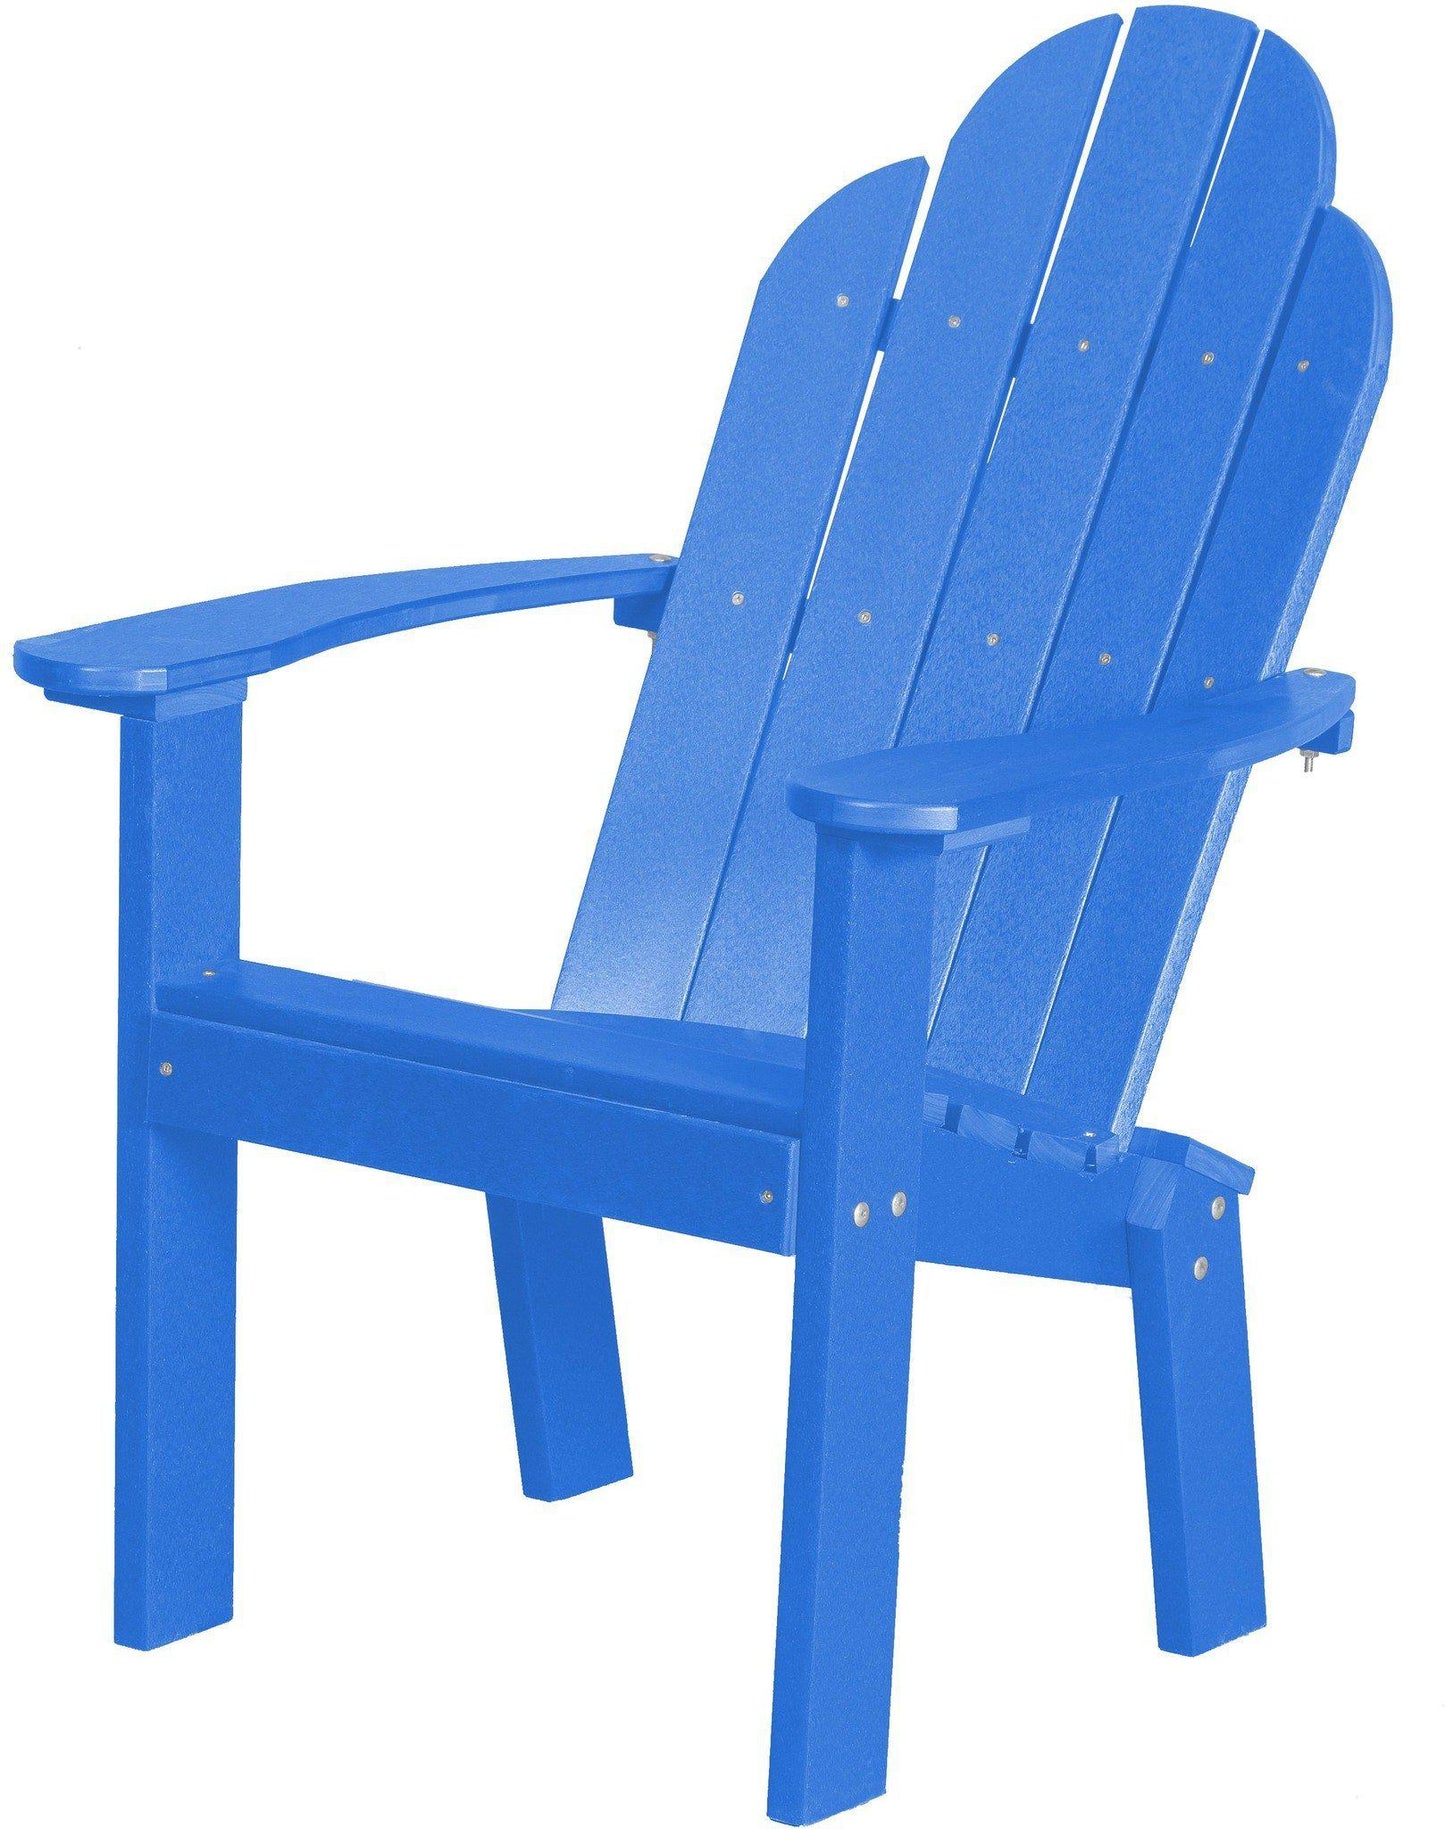 Wildridge Recycled Plastic Heritage Outdoor Dining / Deck Chair - LEAD TIME TO SHIP 6 WEEKS OR LESS